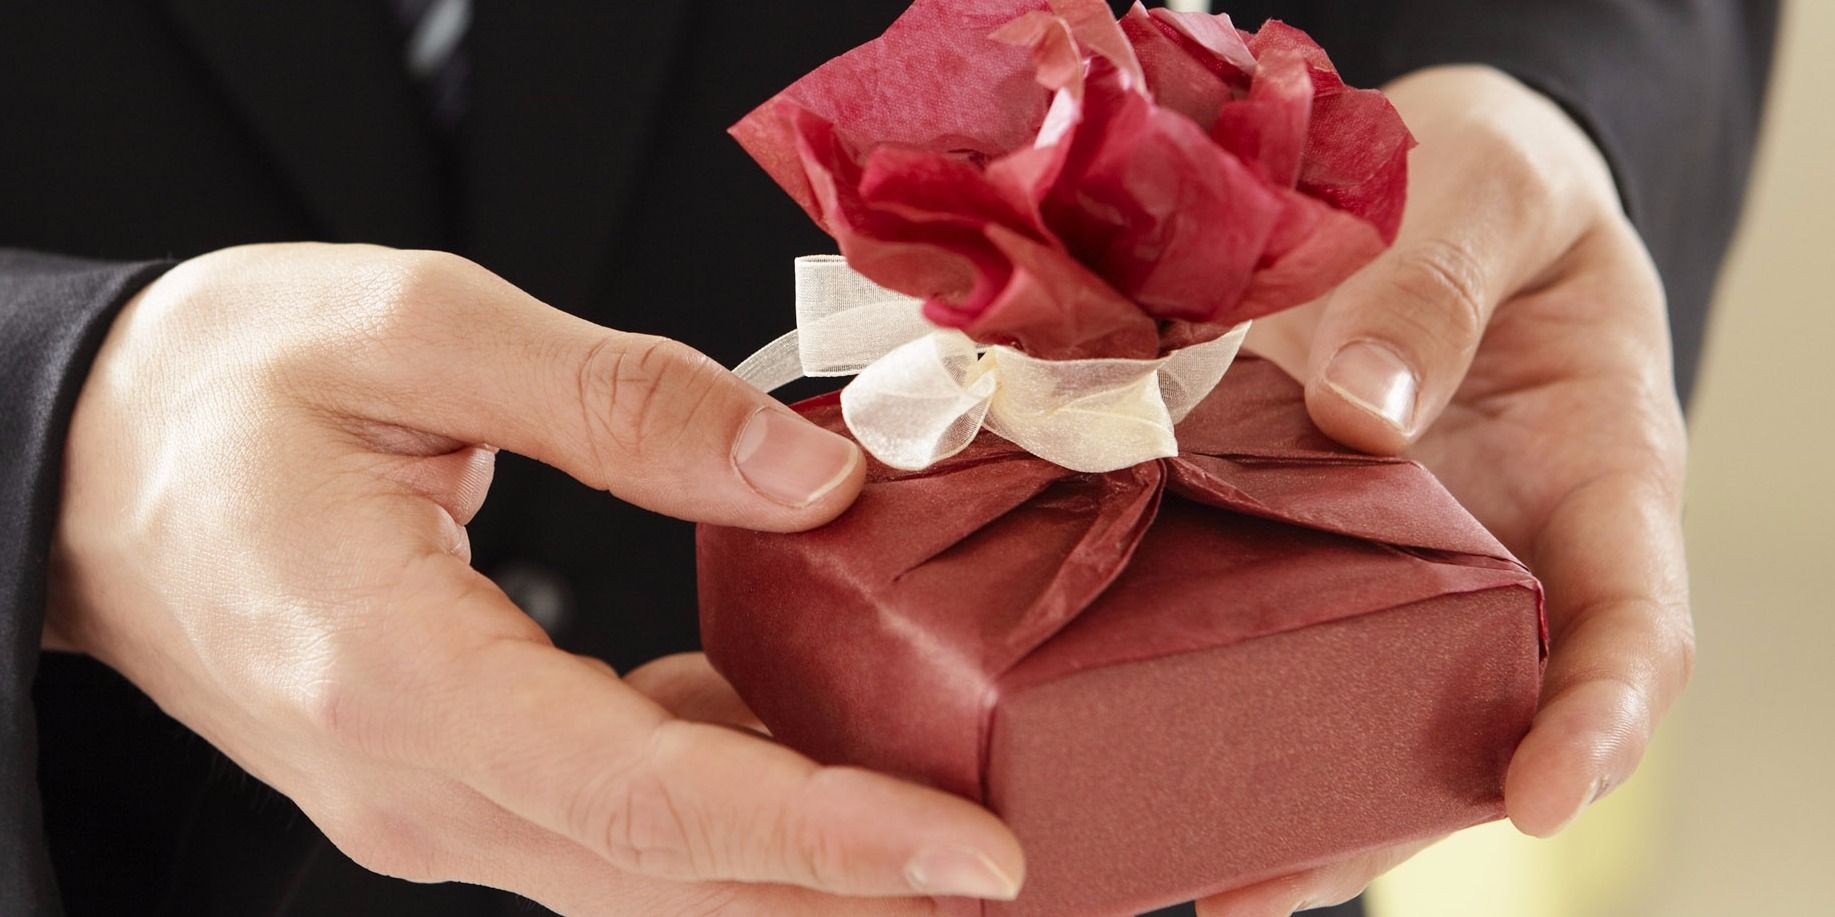 Unexpected Generosity: Strangers Deliver Gifts After Misdirected Text